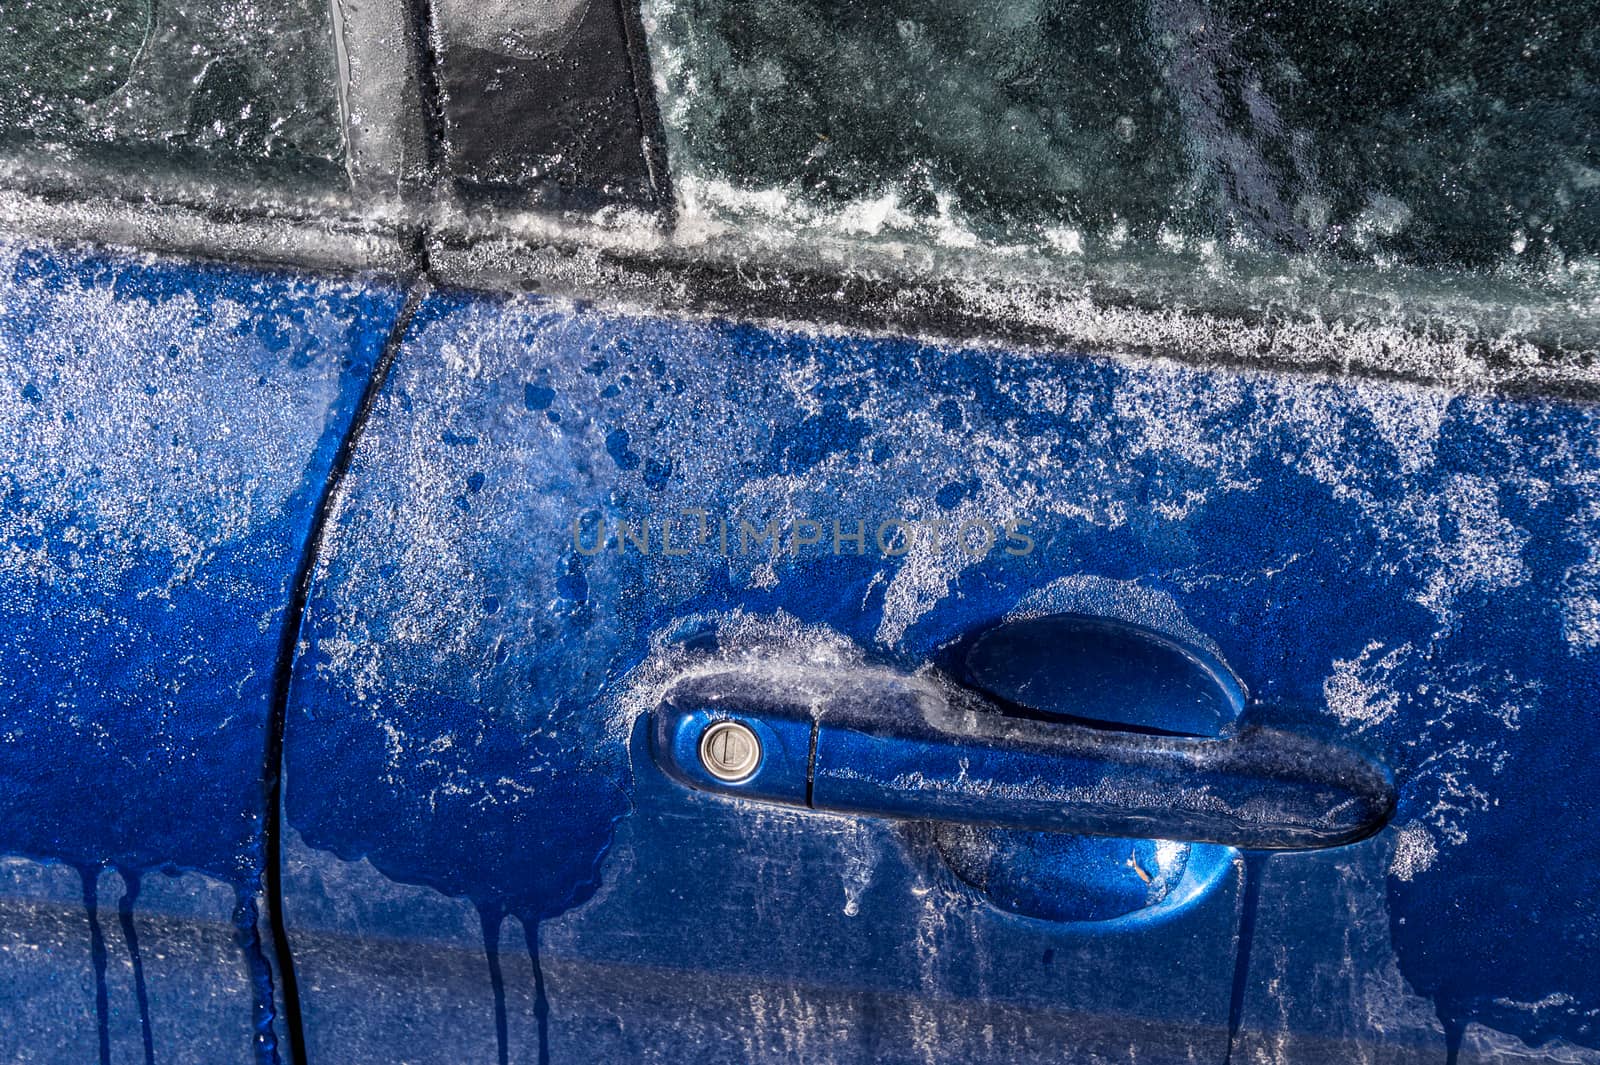 Thick layer of ice covering car after freezing rain in Montreal, Canada - Close up of car handle.